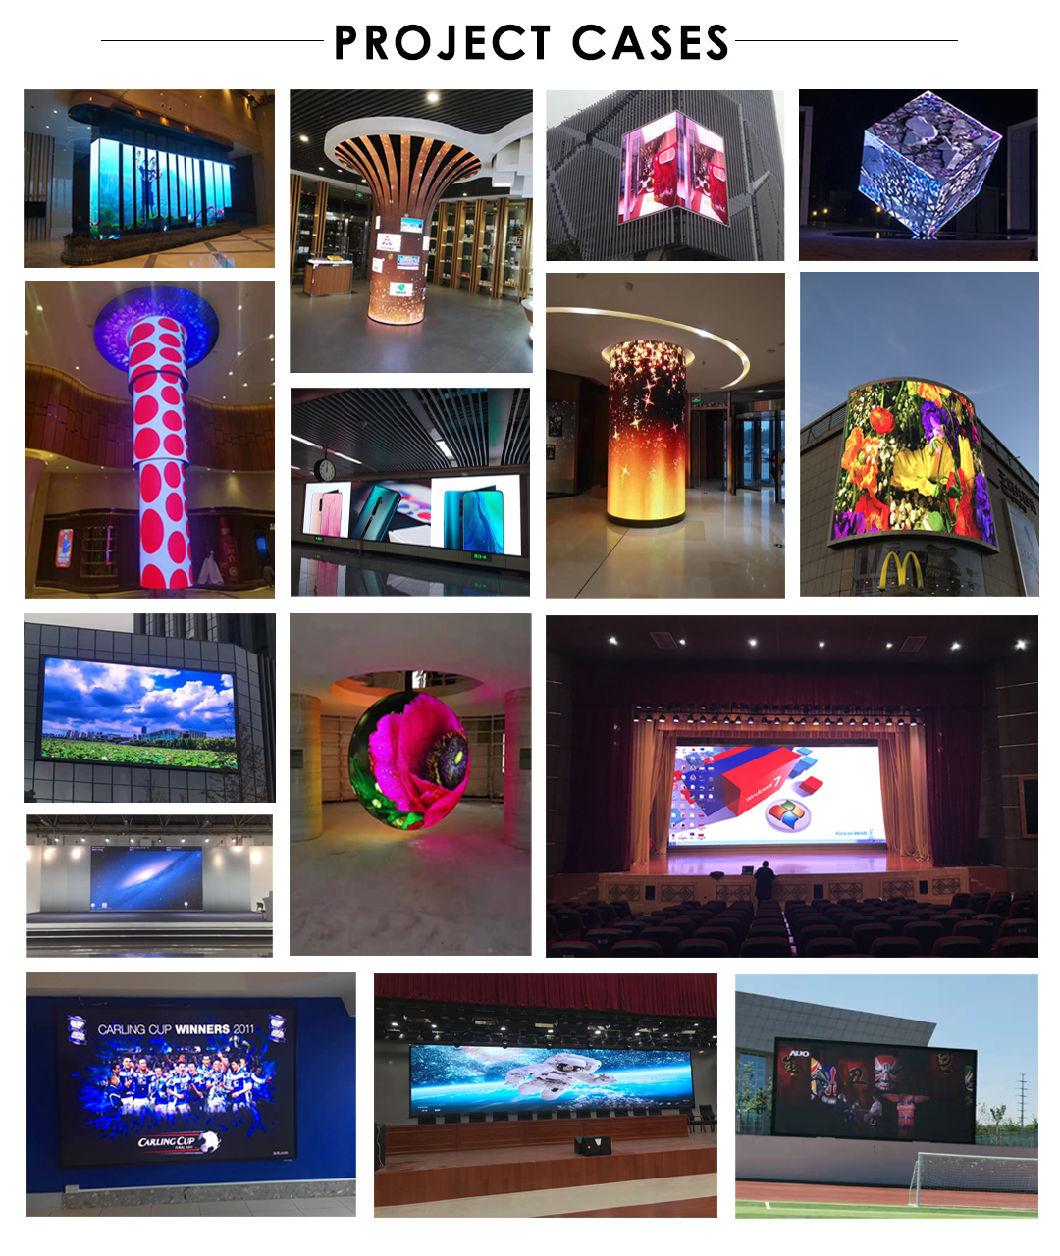 Ultra Transparent LED Display Module of Shopping Centre Advertising LED Display Screen P3.91-7.81